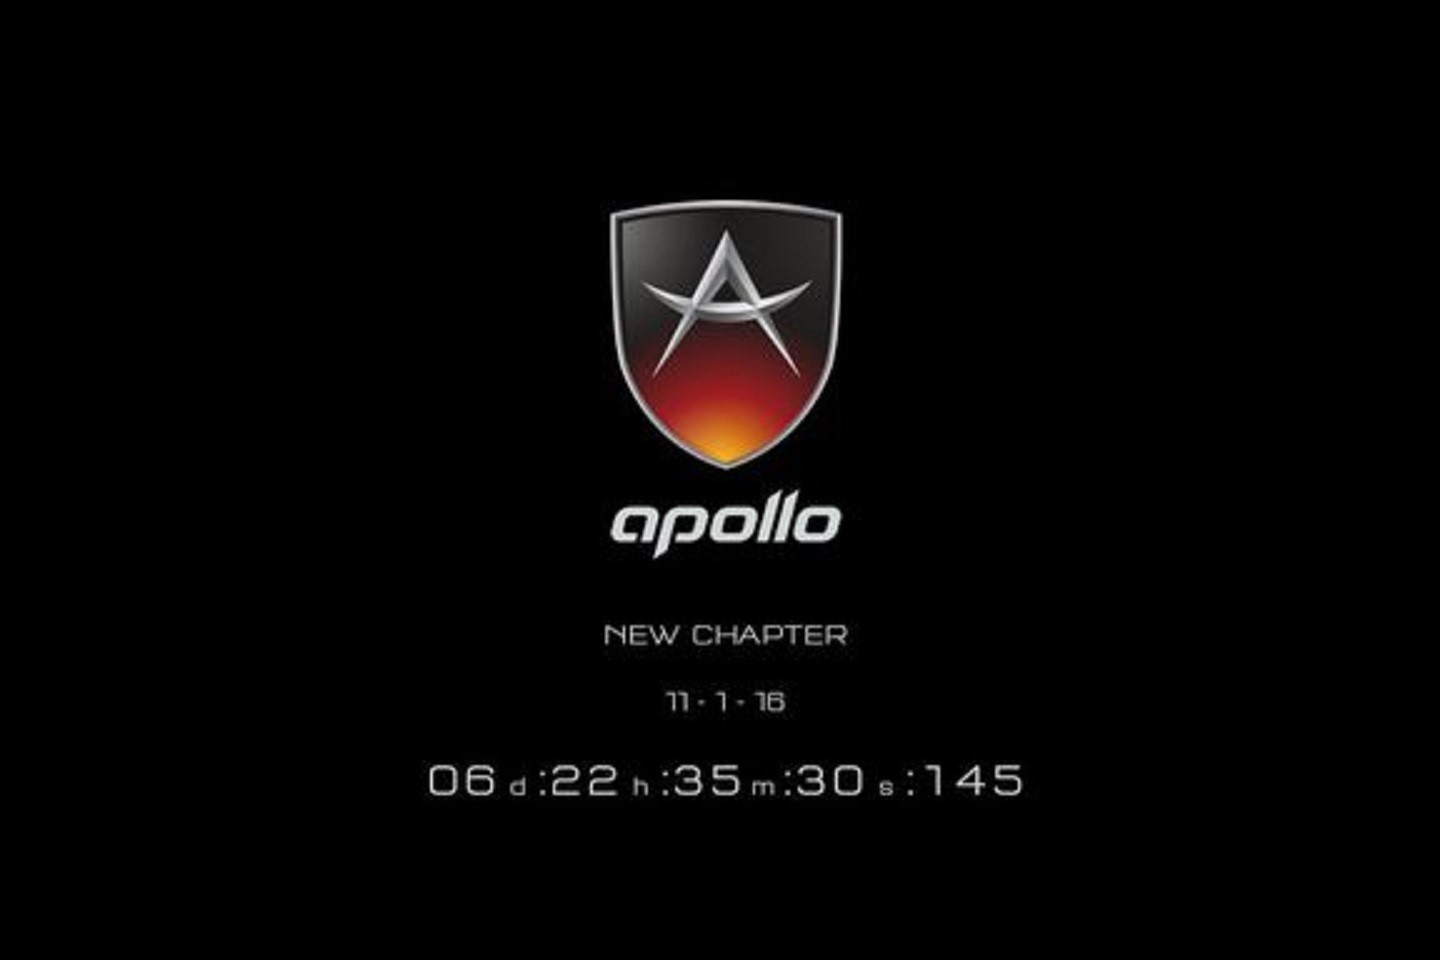 Image showing the Apollo logo on a black background